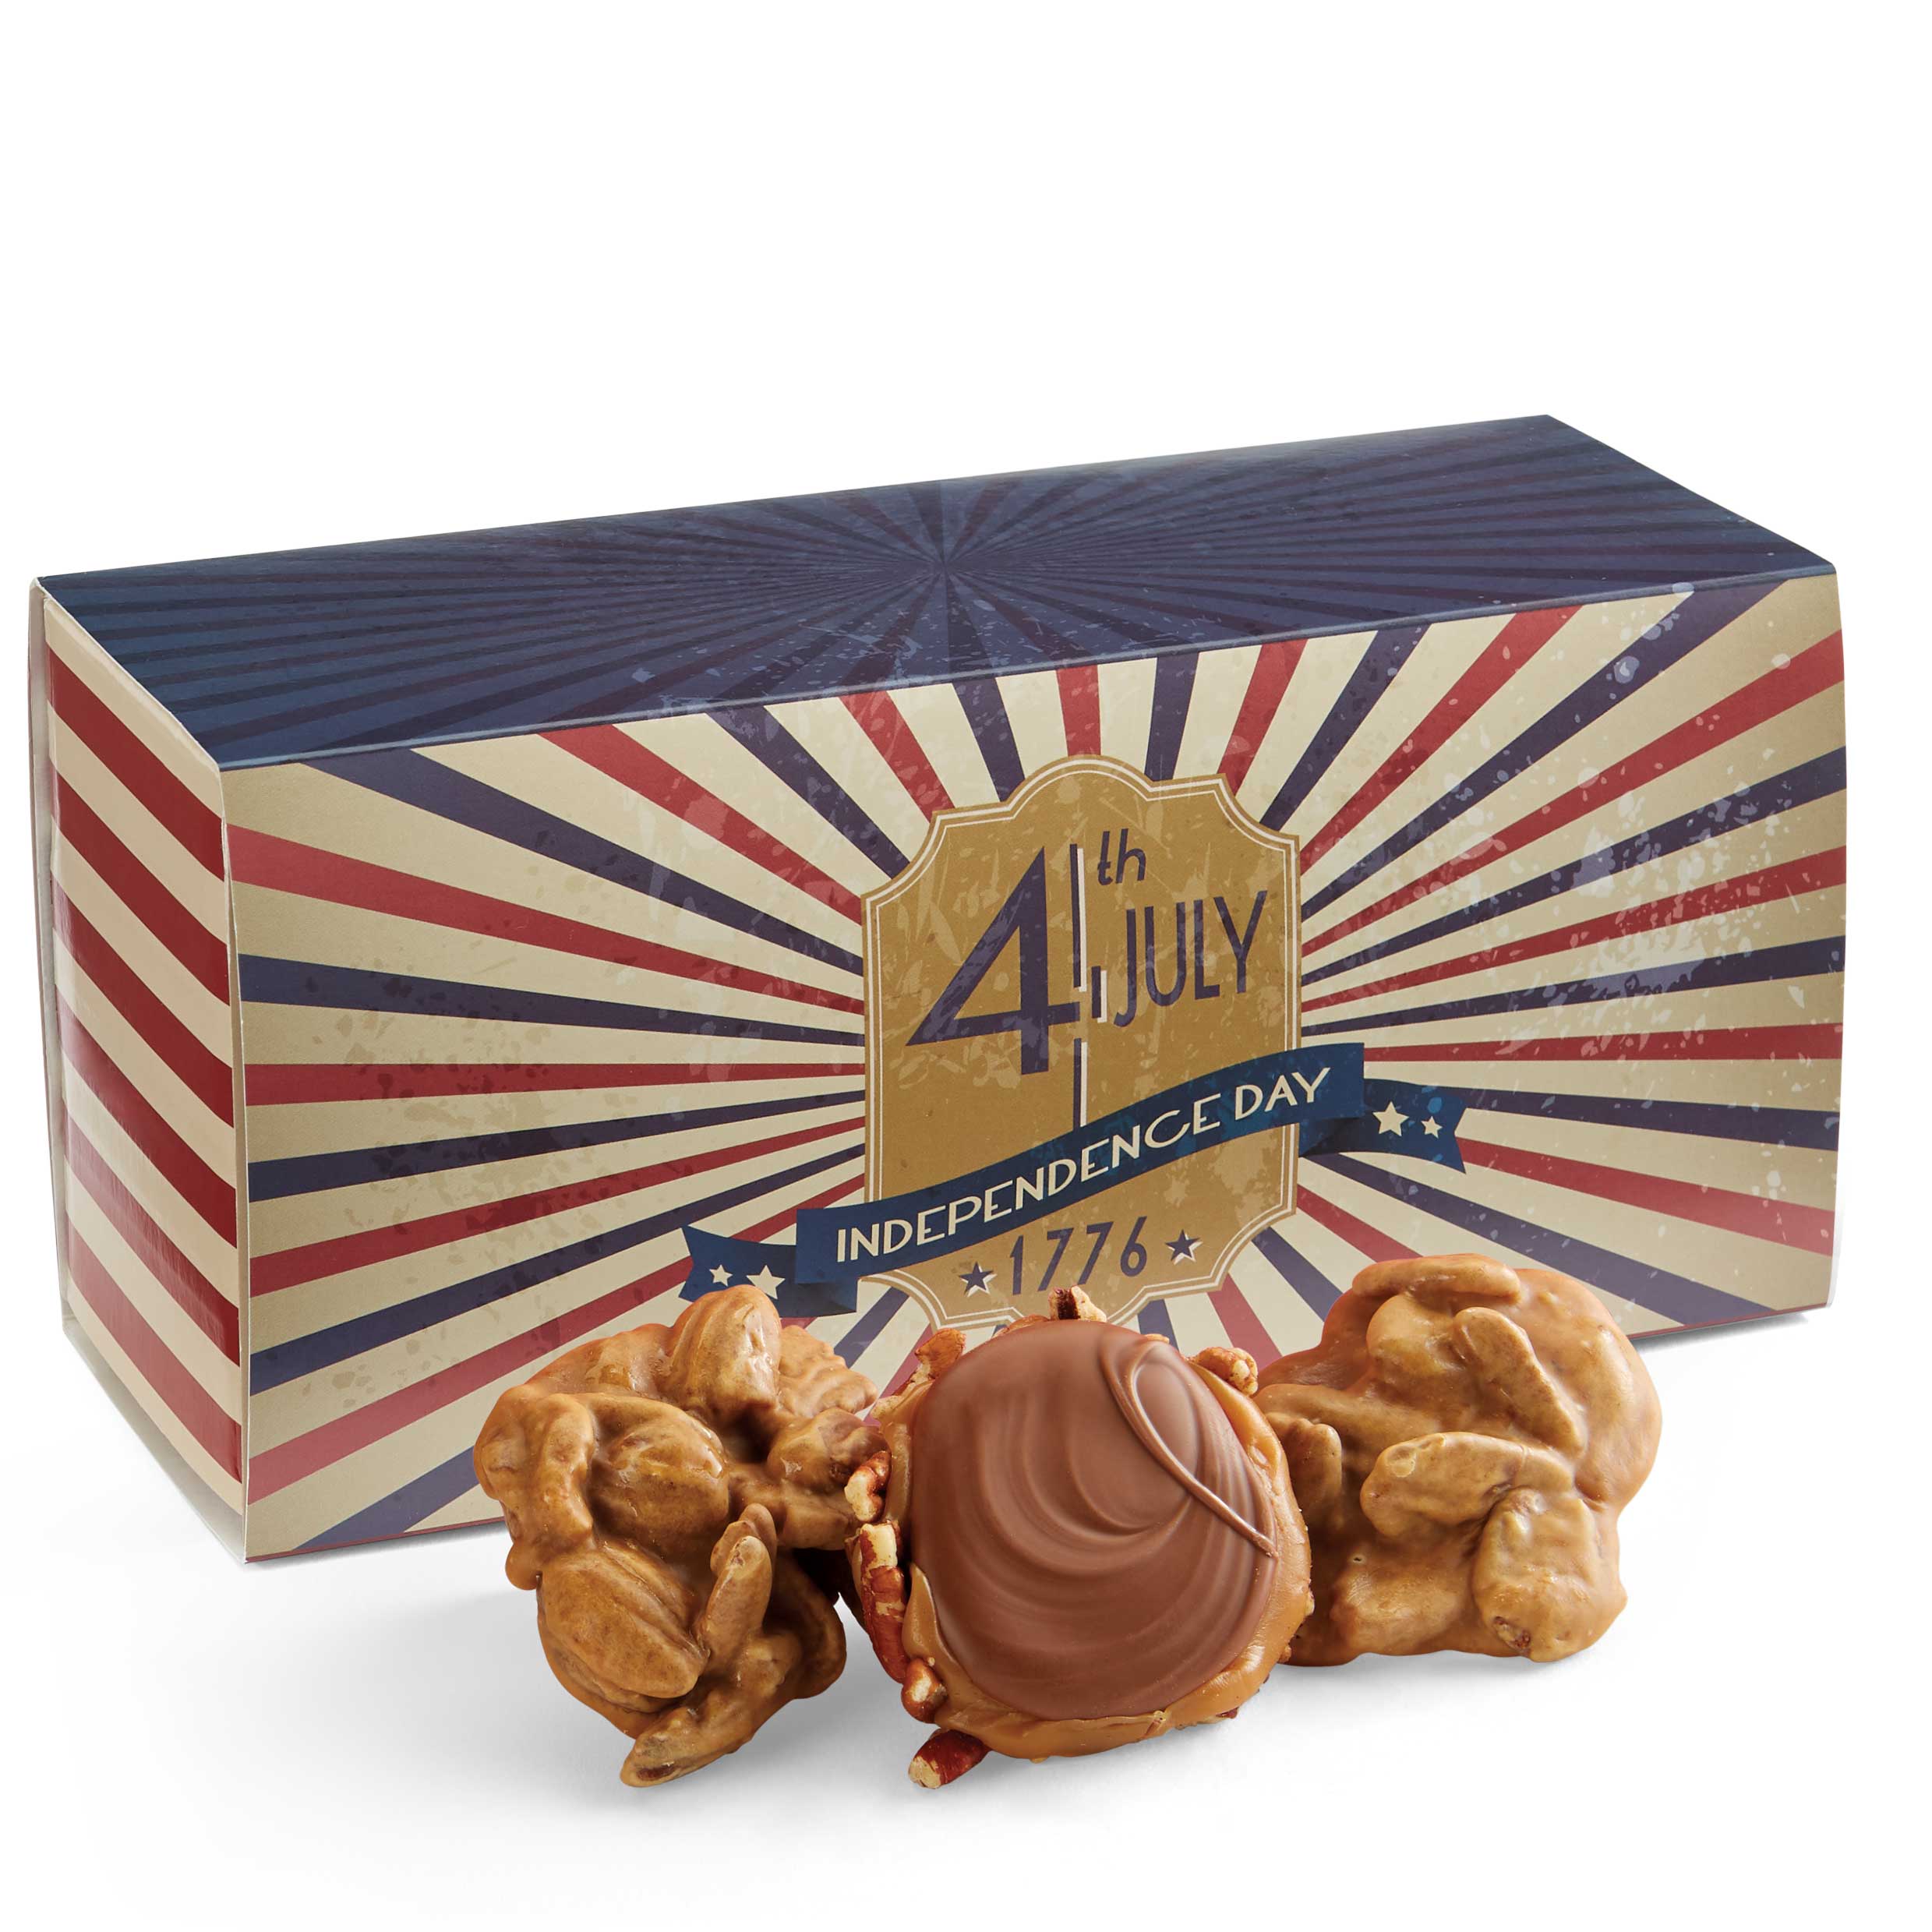 12 Piece Praline & Turtle Gopher Duo in the 4th of July Gift Box